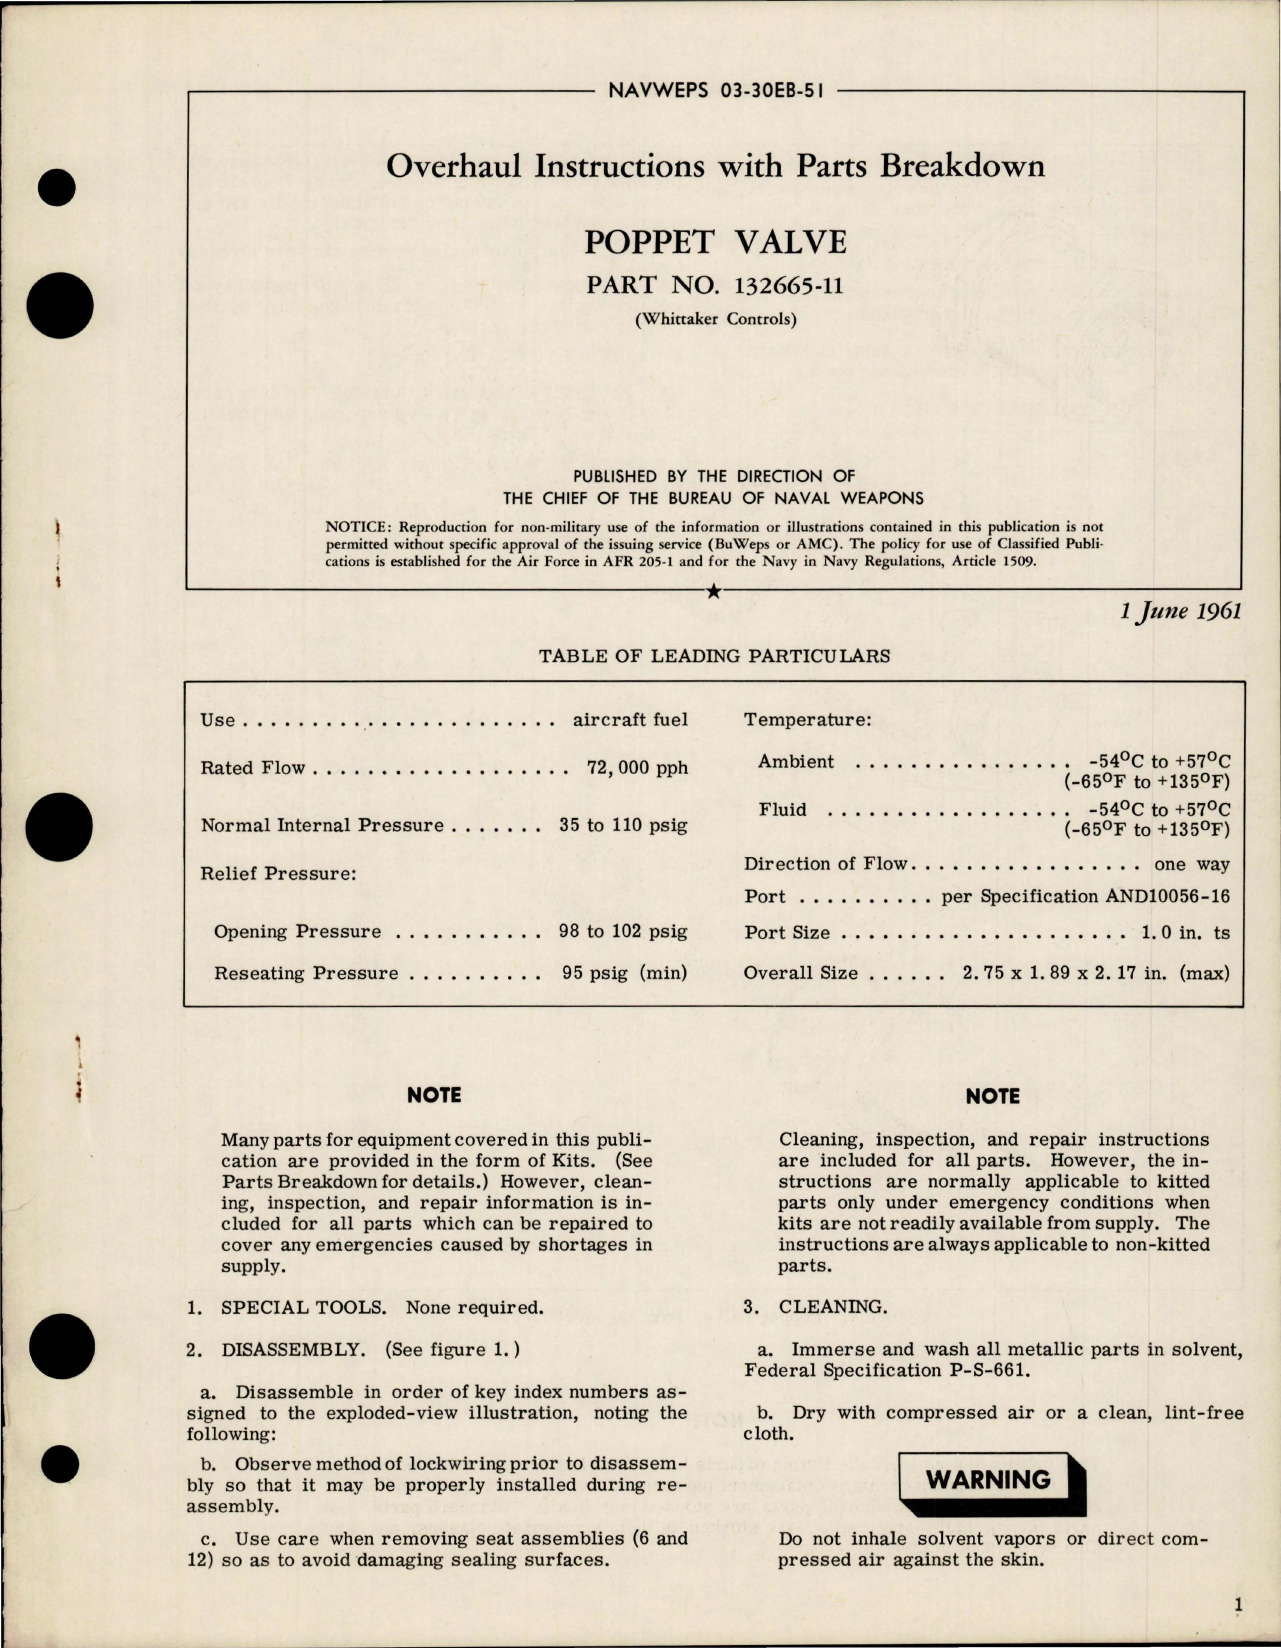 Sample page 1 from AirCorps Library document: Overhaul Instructions with Parts Breakdown for Poppet Valve - Part 132665-11